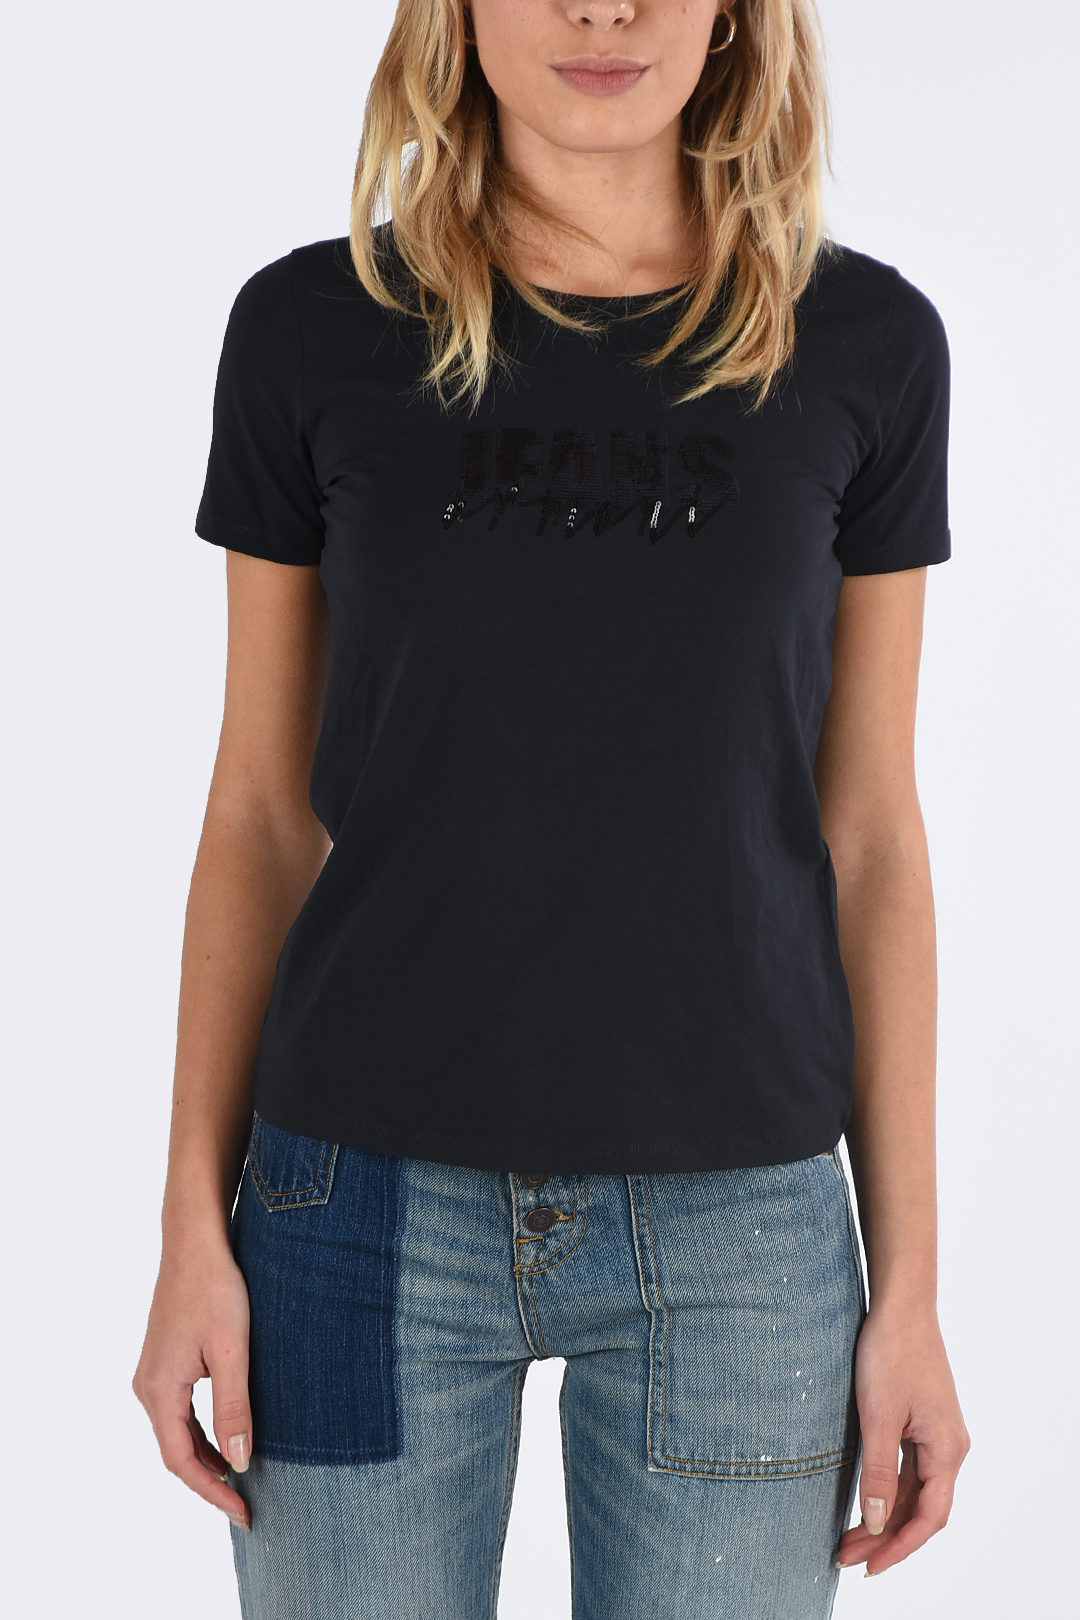 Armani JEANS Sequined T-shirt women - Glamood Outlet